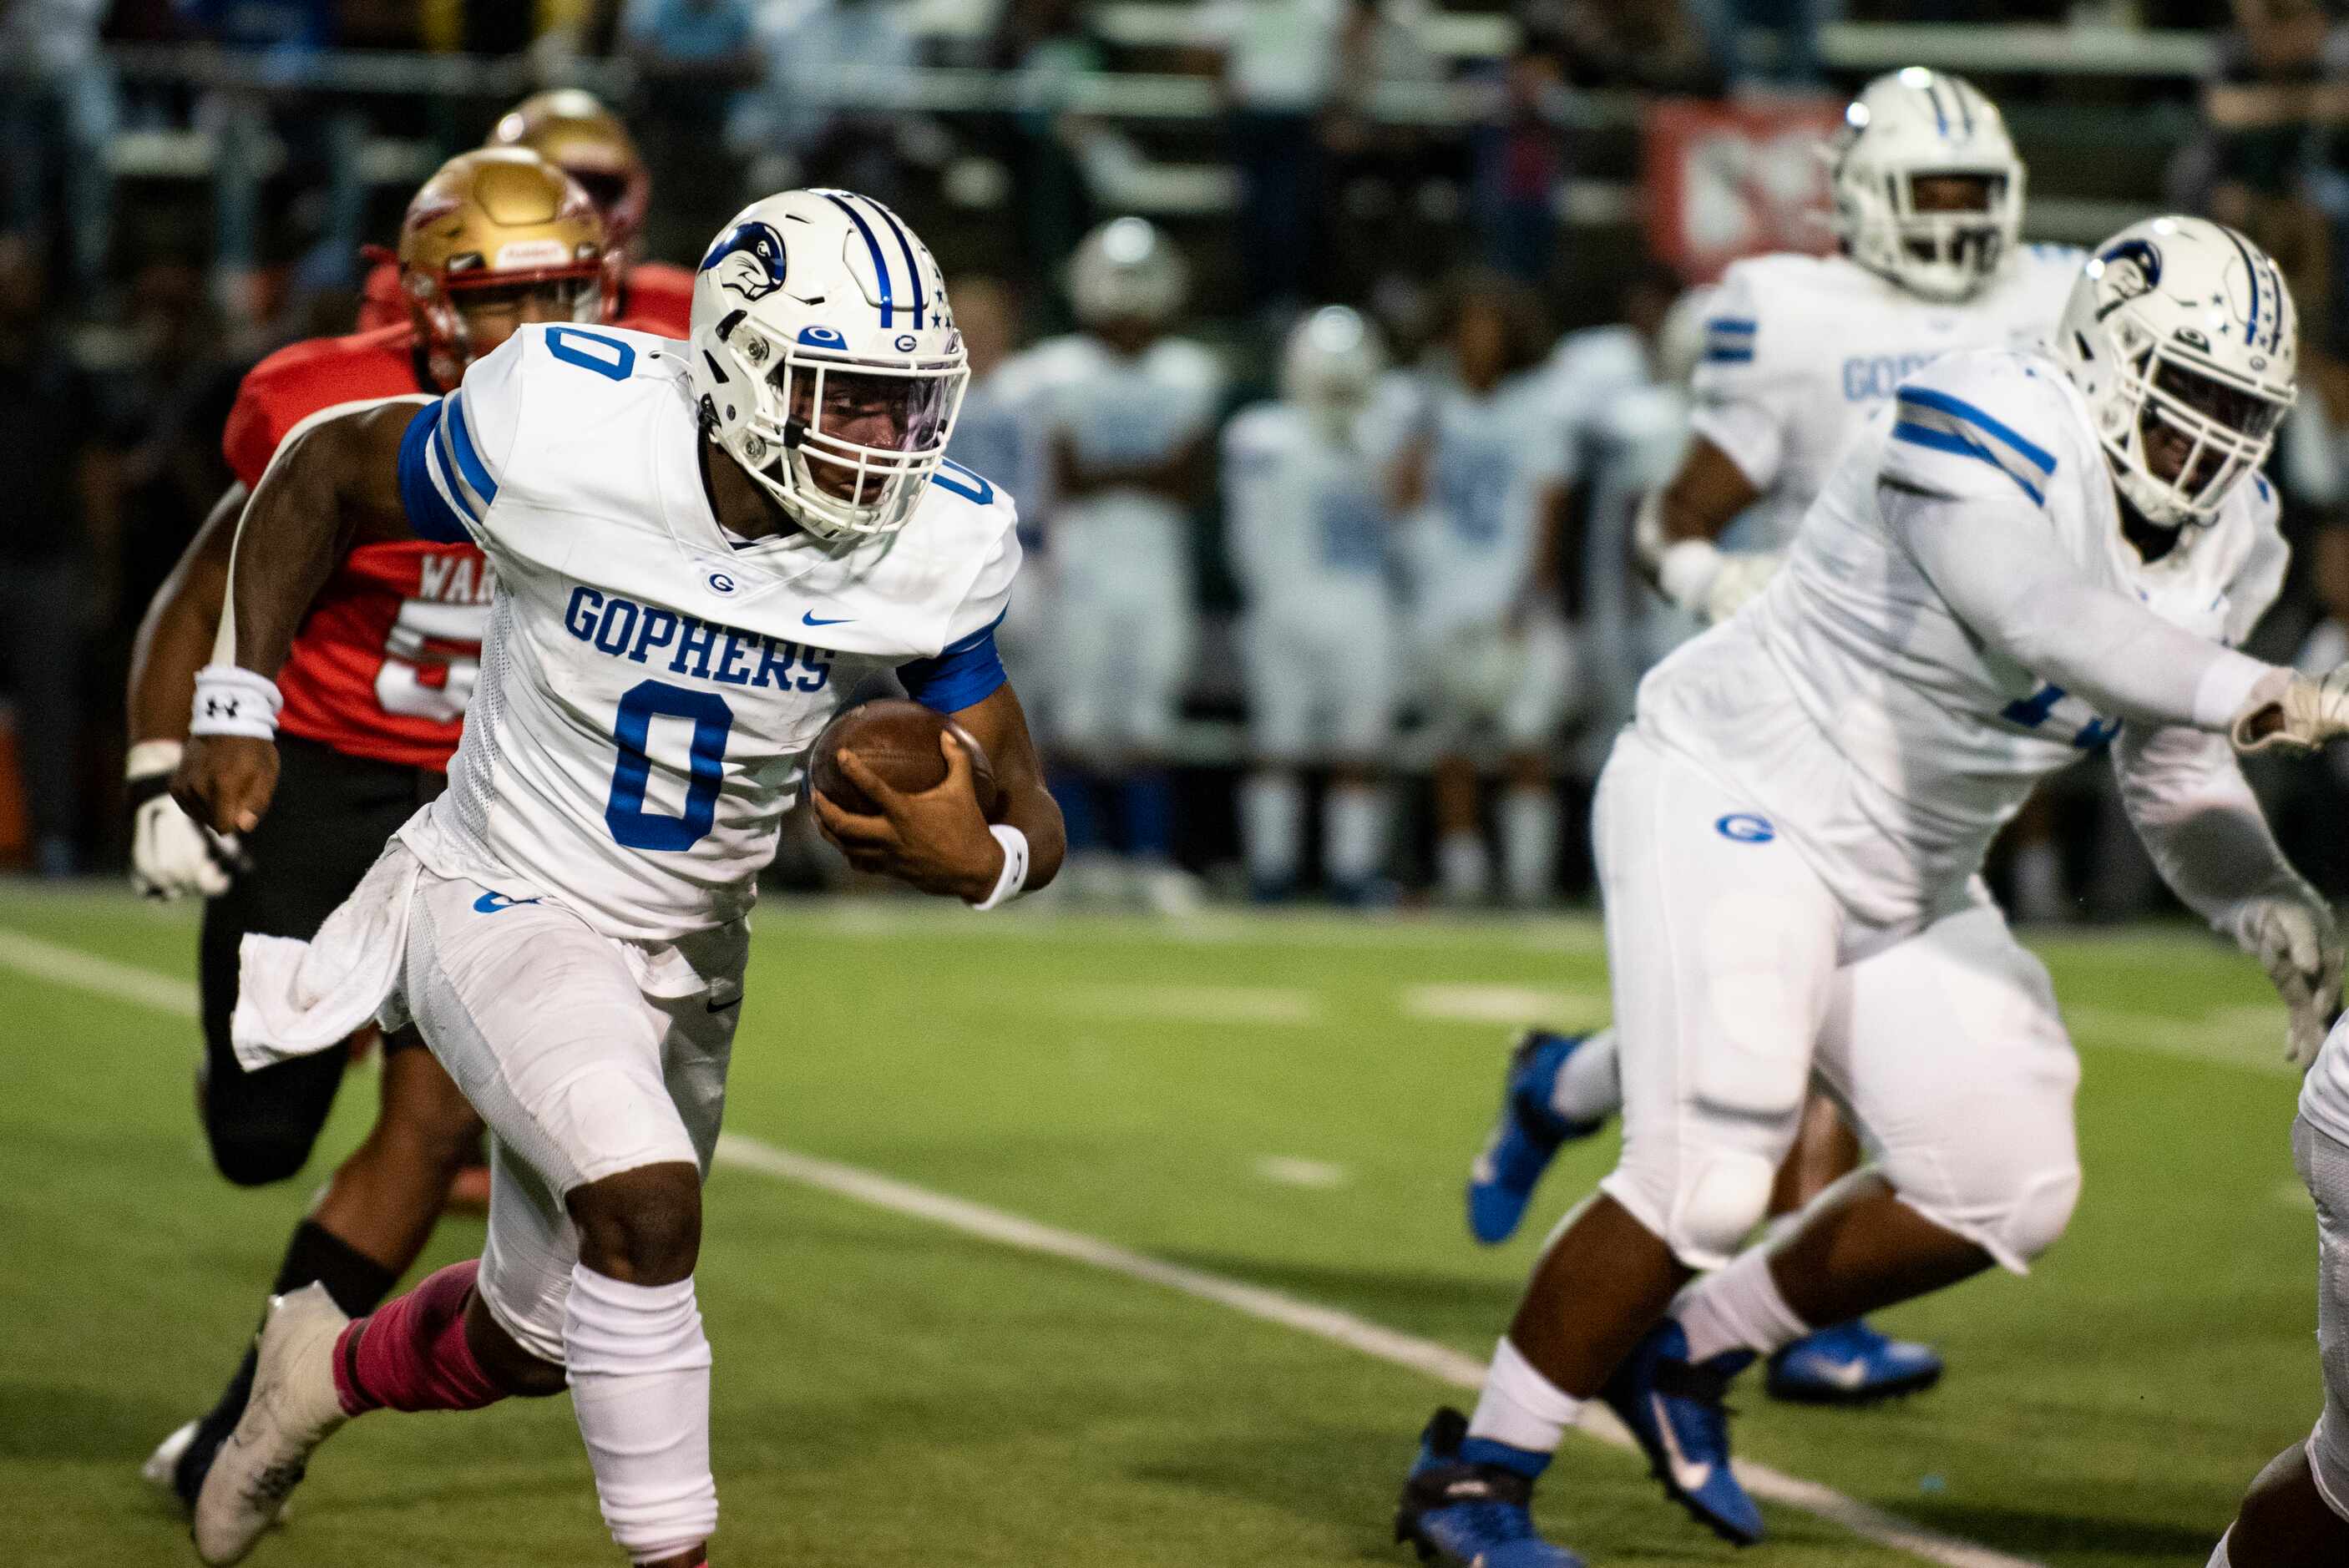 Grand Prairie senior Savion Red (0) looks to avoid defenders as he rushes down the field...